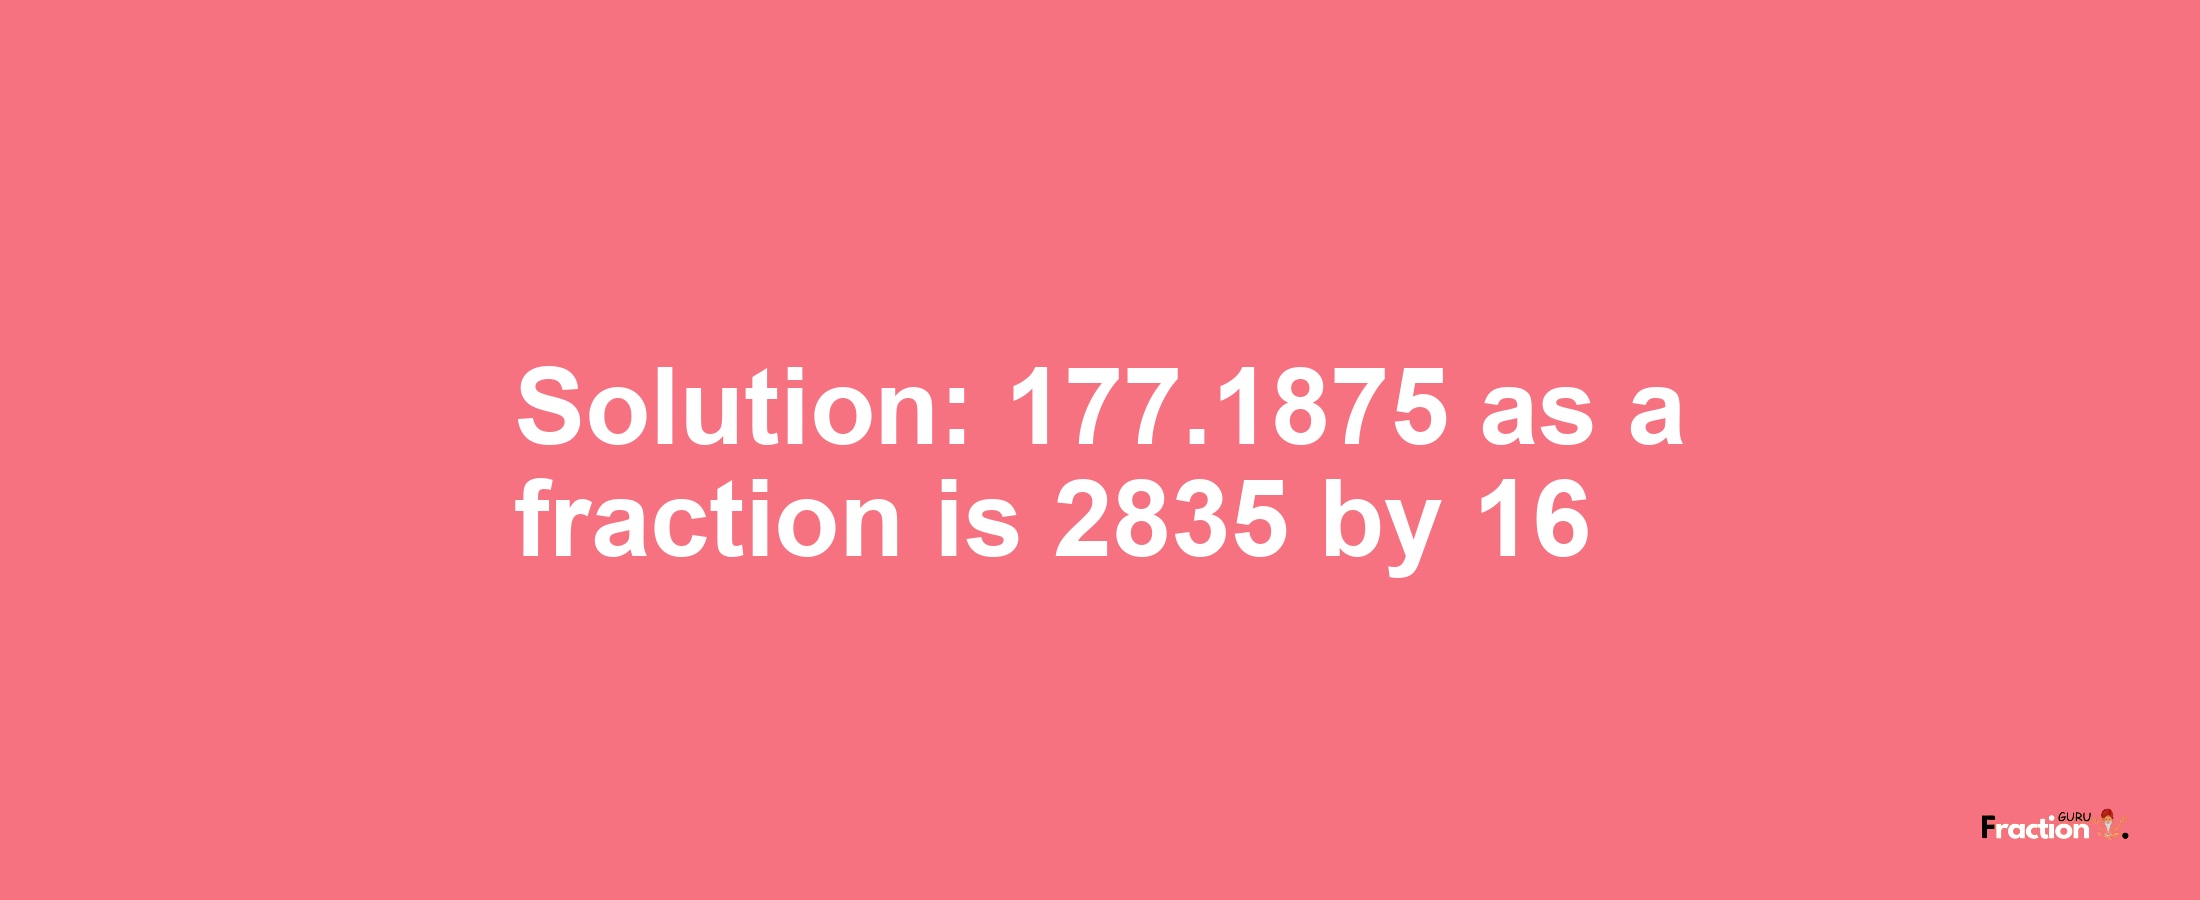 Solution:177.1875 as a fraction is 2835/16